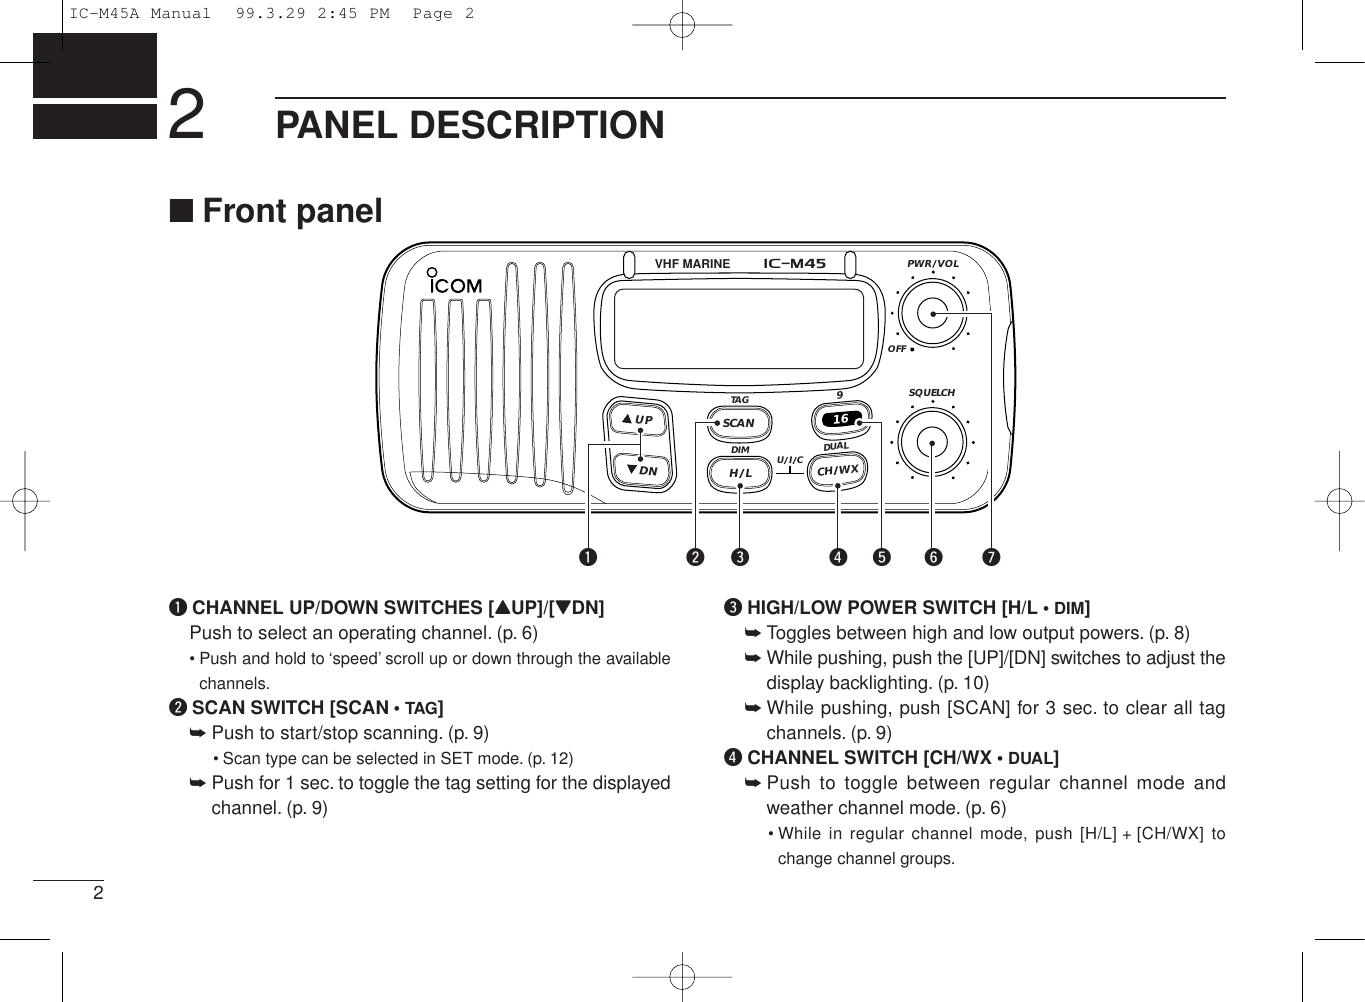 22PANEL DESCRIPTION■Front panelqCHANNEL UP/DOWN SWITCHES [YUP]/[ZDN]Push to select an operating channel. (p. 6)• Push and hold to ‘speed’ scroll up or down through the availablechannels.wSCAN SWITCH [SCAN • TAG]➥Push to start/stop scanning. (p. 9)• Scan type can be selected in SET mode. (p. 12)➥Push for 1 sec. to toggle the tag setting for the displayedchannel. (p. 9)eHIGH/LOW POWER SWITCH [H/L • DIM]➥Toggles between high and low output powers. (p. 8)➥While pushing, push the [UP]/[DN] switches to adjust thedisplay backlighting. (p. 10)➥While pushing, push [SCAN] for 3 sec. to clear all tagchannels. (p. 9)rCHANNEL SWITCH [CH/WX • DUAL]➥Push to toggle between regular channel mode andweather channel mode. (p. 6)• While in regular channel mode, push [H/L] + [CH/WX] tochange channel groups.VHF MARINE iM45PWRSQUELCHOFFDCH WX9UALUDIMTAGHUDNPSCANLICVOL16qwe rty uIC-M45A Manual  99.3.29 2:45 PM  Page 2